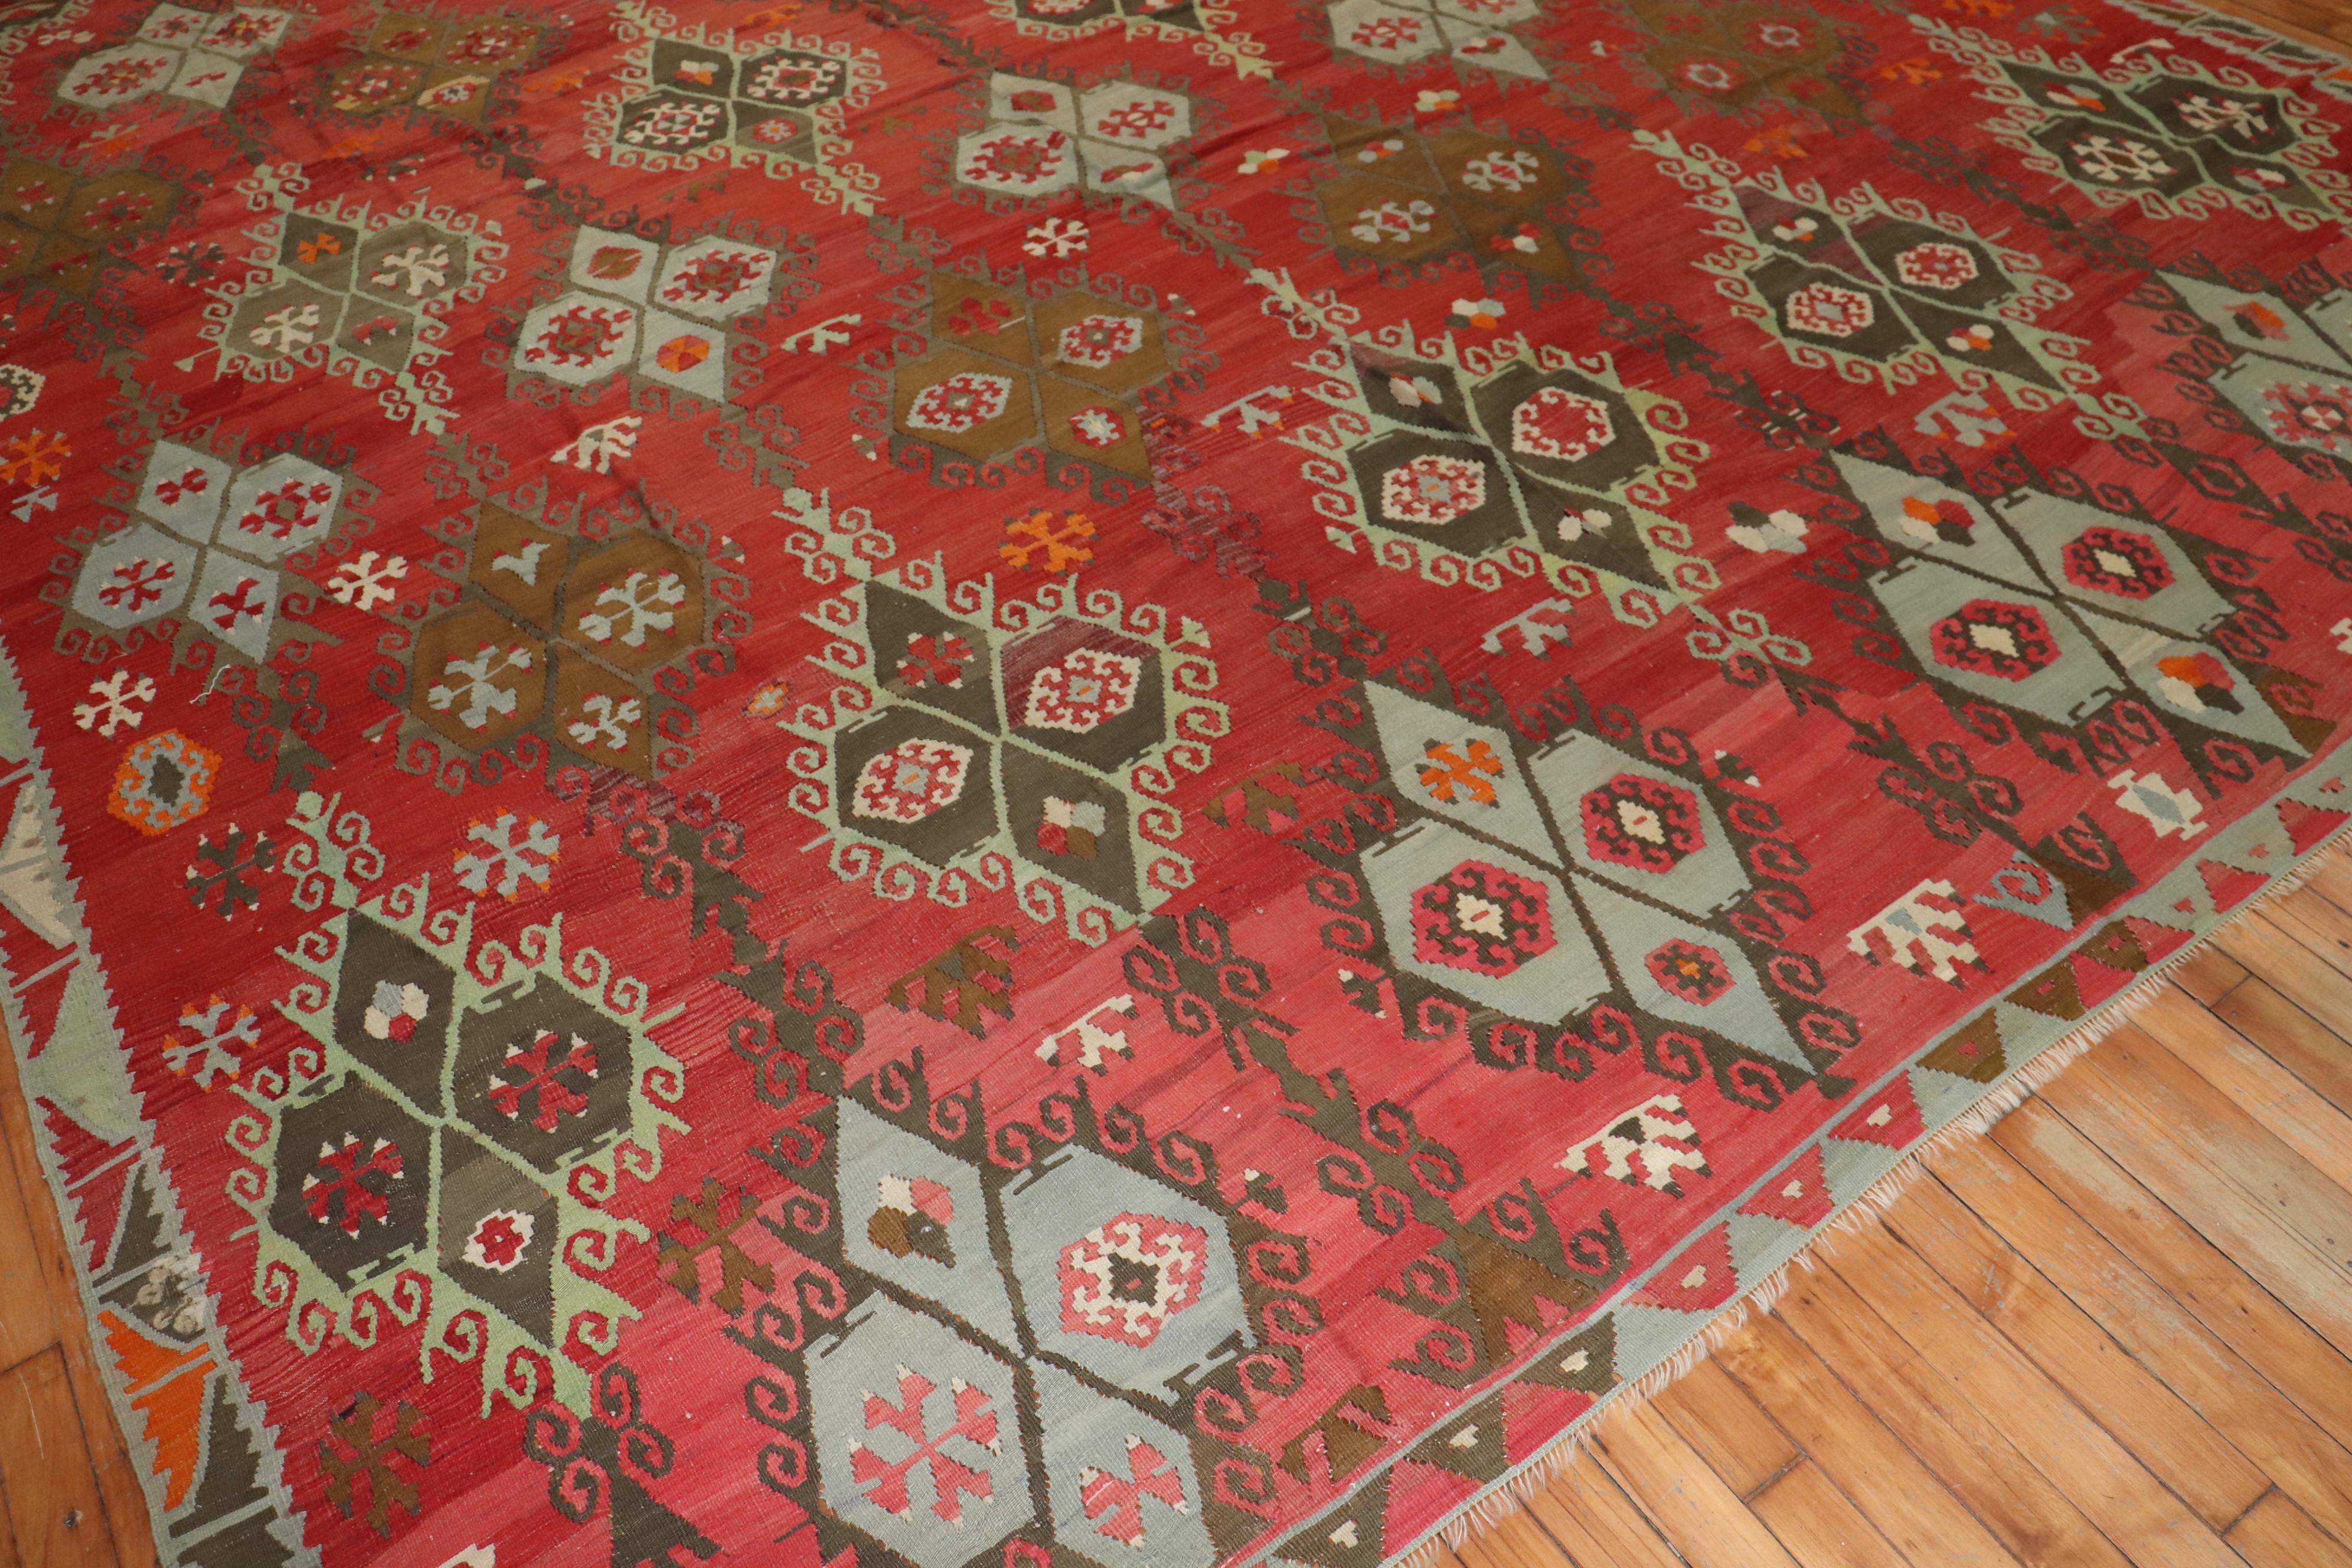 Large Scale Masculine Antique Turkish Kilim Room Size Rug, Early 20th Century 8